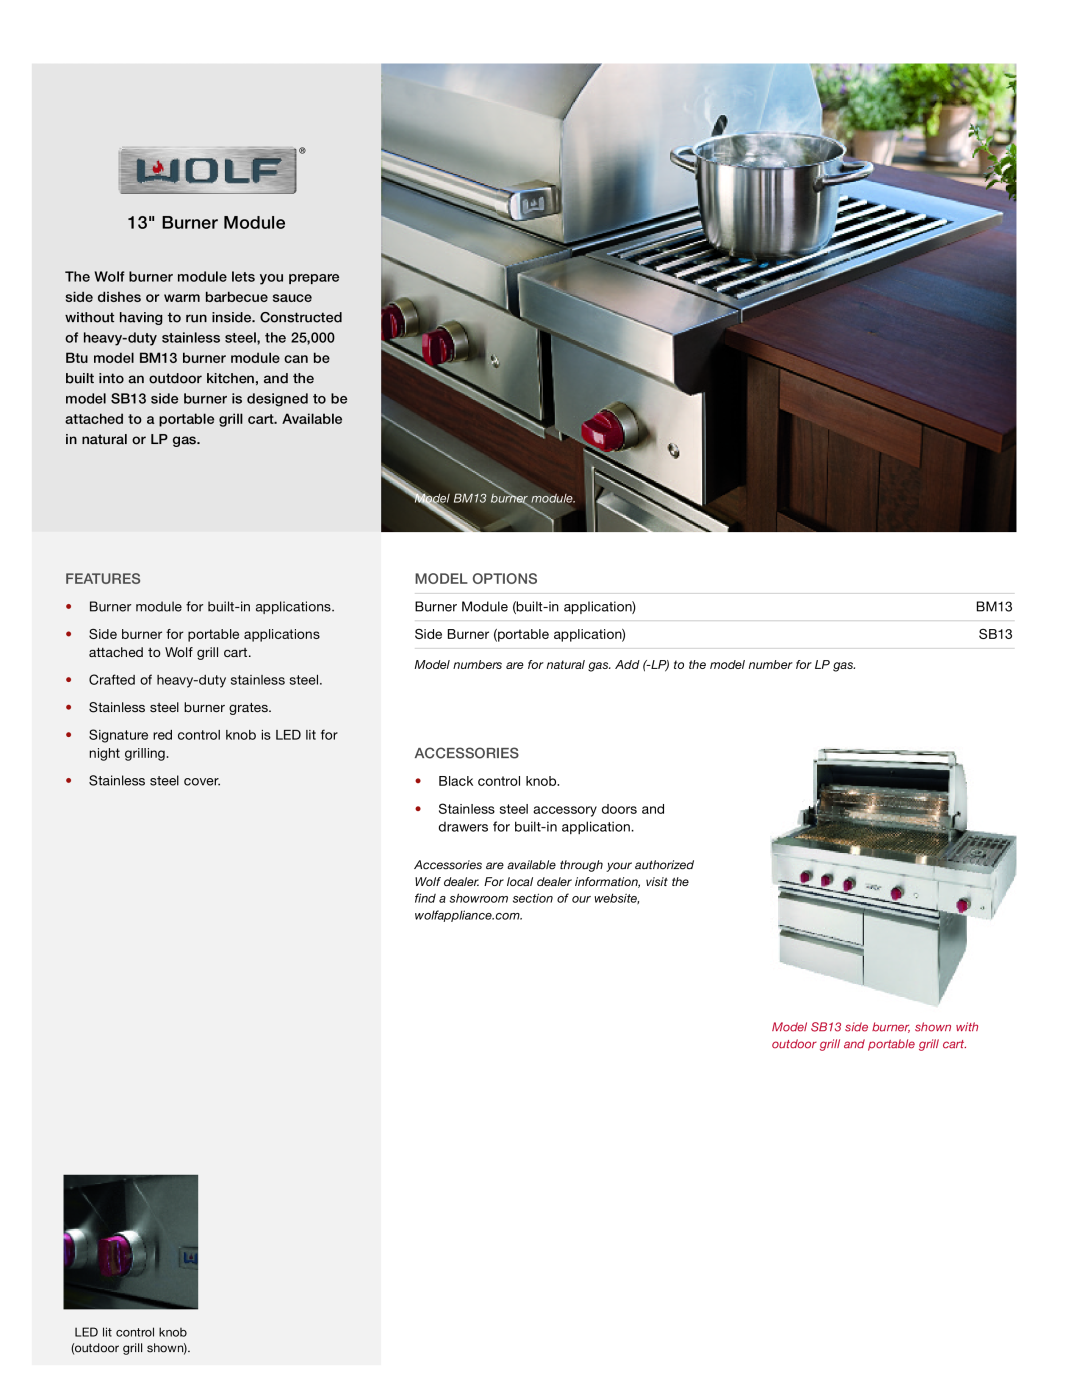 Wolf Appliance Company BM13, SB13 manual Burner Module, Features, Model Options, Accessories 